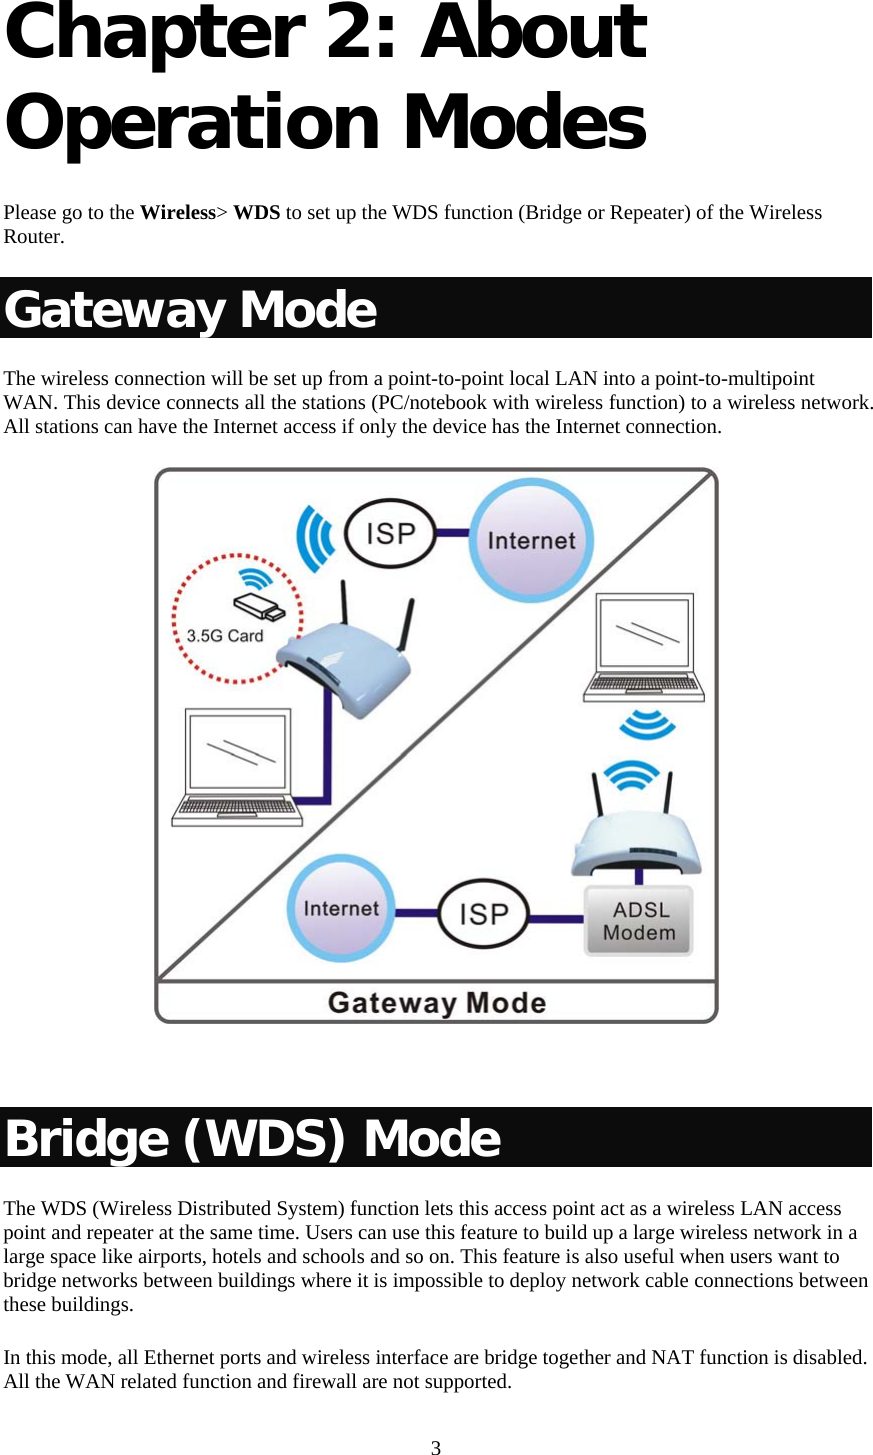   3 Chapter 2: About Operation Modes   Please go to the Wireless&gt; WDS to set up the WDS function (Bridge or Repeater) of the Wireless Router. Gateway Mode The wireless connection will be set up from a point-to-point local LAN into a point-to-multipoint WAN. This device connects all the stations (PC/notebook with wireless function) to a wireless network. All stations can have the Internet access if only the device has the Internet connection.    Bridge (WDS) Mode The WDS (Wireless Distributed System) function lets this access point act as a wireless LAN access point and repeater at the same time. Users can use this feature to build up a large wireless network in a large space like airports, hotels and schools and so on. This feature is also useful when users want to bridge networks between buildings where it is impossible to deploy network cable connections between these buildings.  In this mode, all Ethernet ports and wireless interface are bridge together and NAT function is disabled. All the WAN related function and firewall are not supported.  